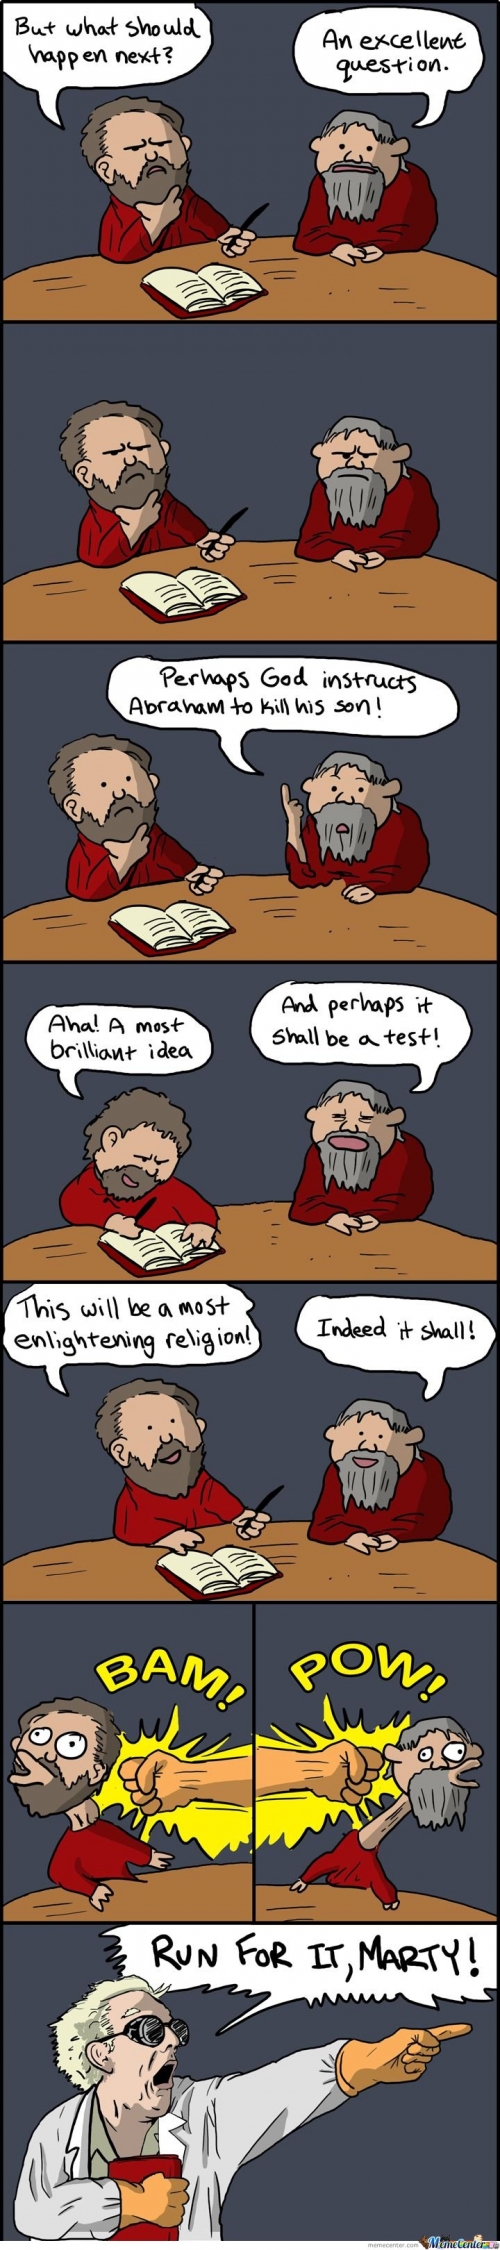 Atheism and Religion 23